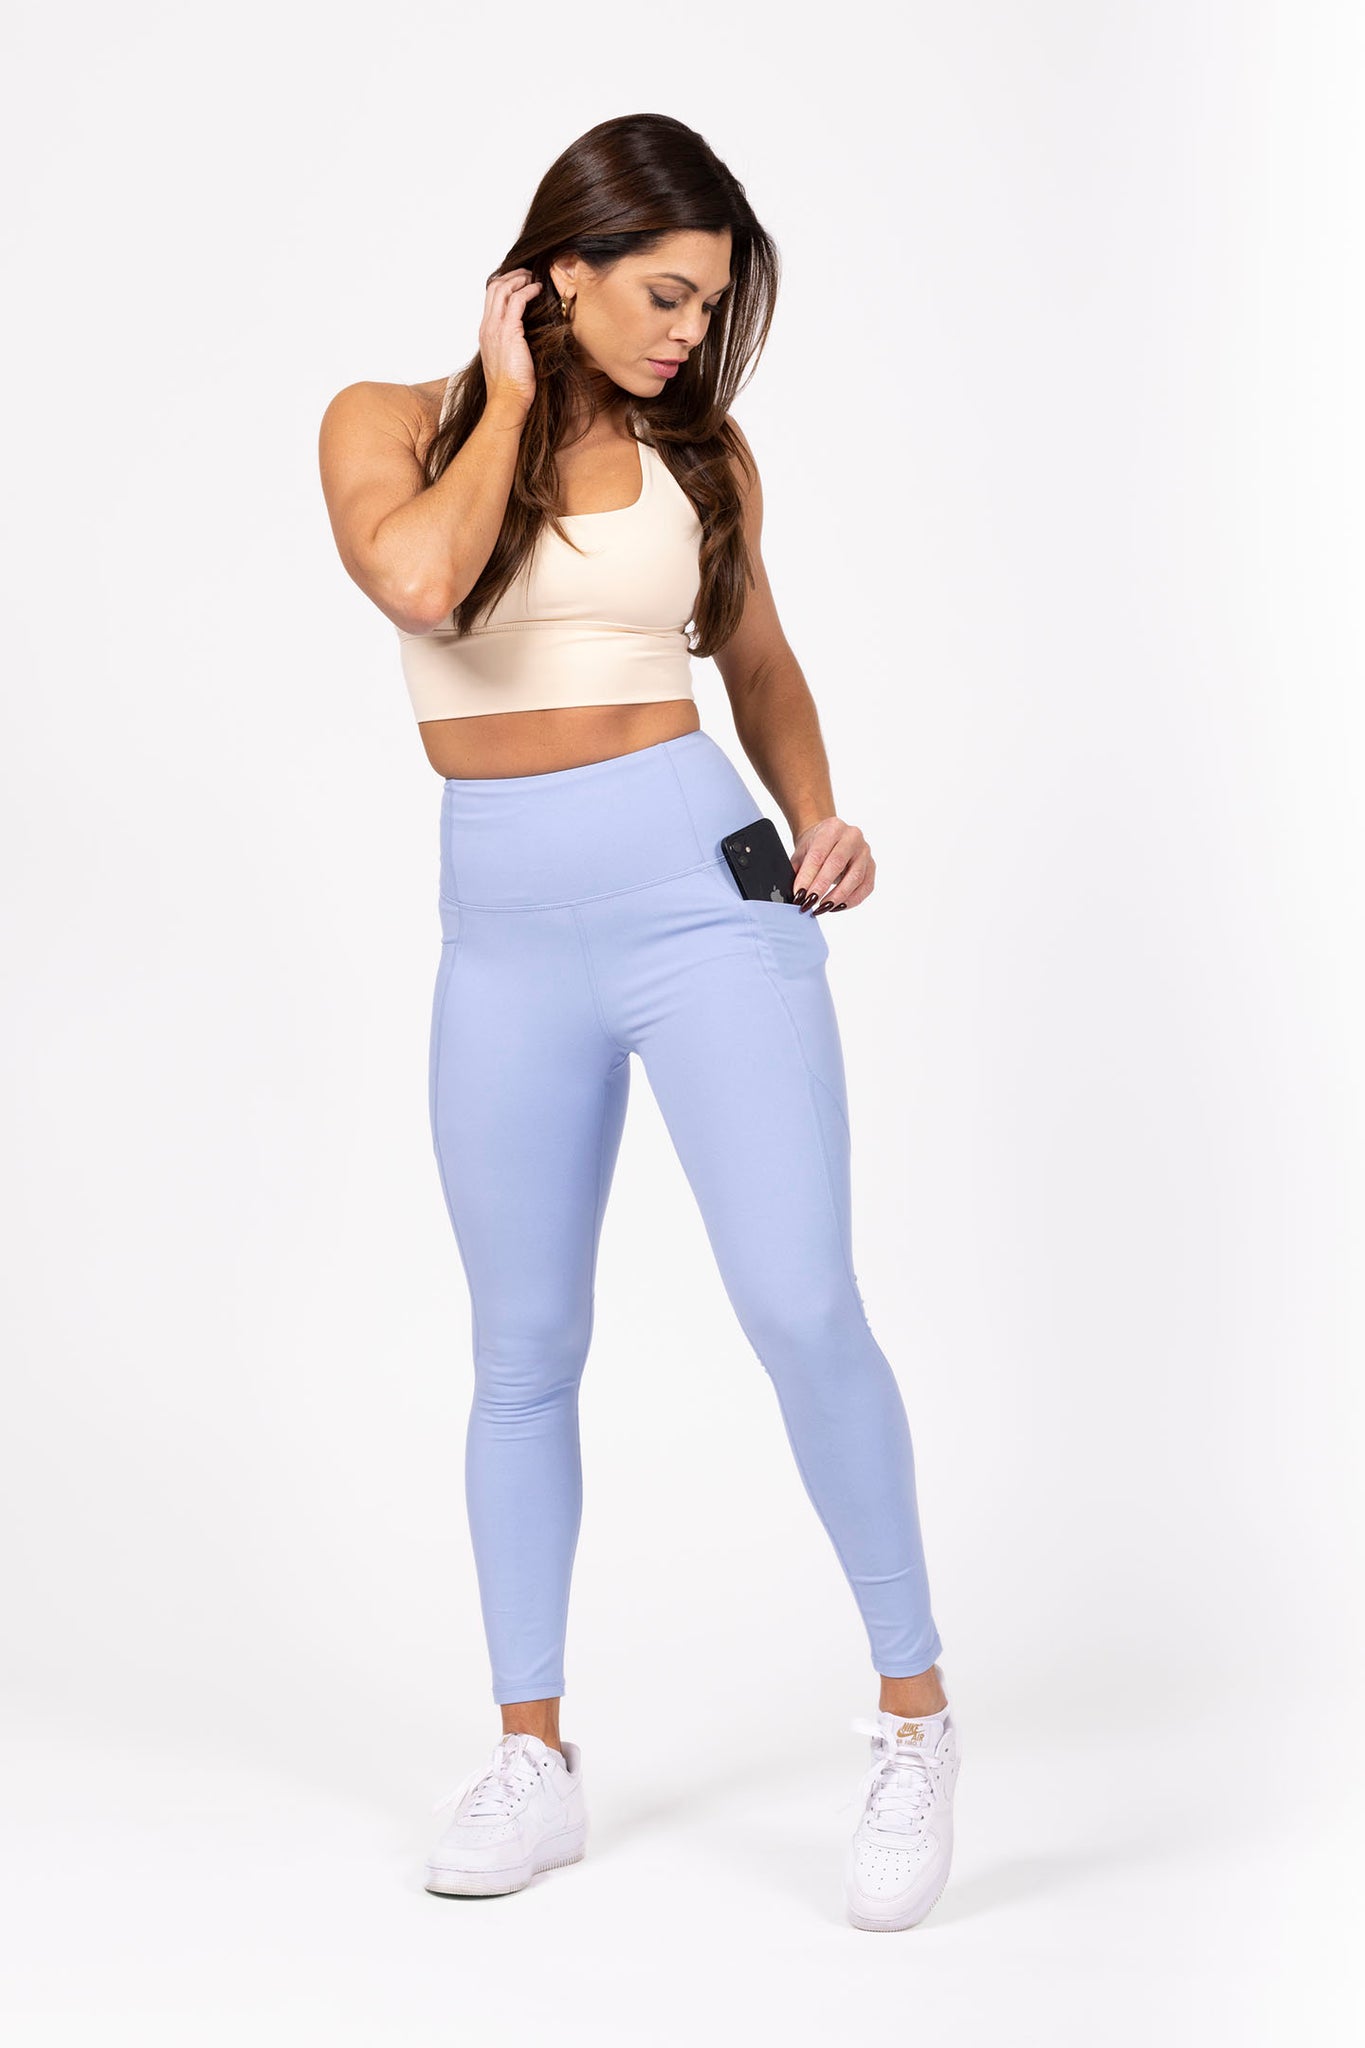 The Athlete Legging by Urban Luxe Lifestyles